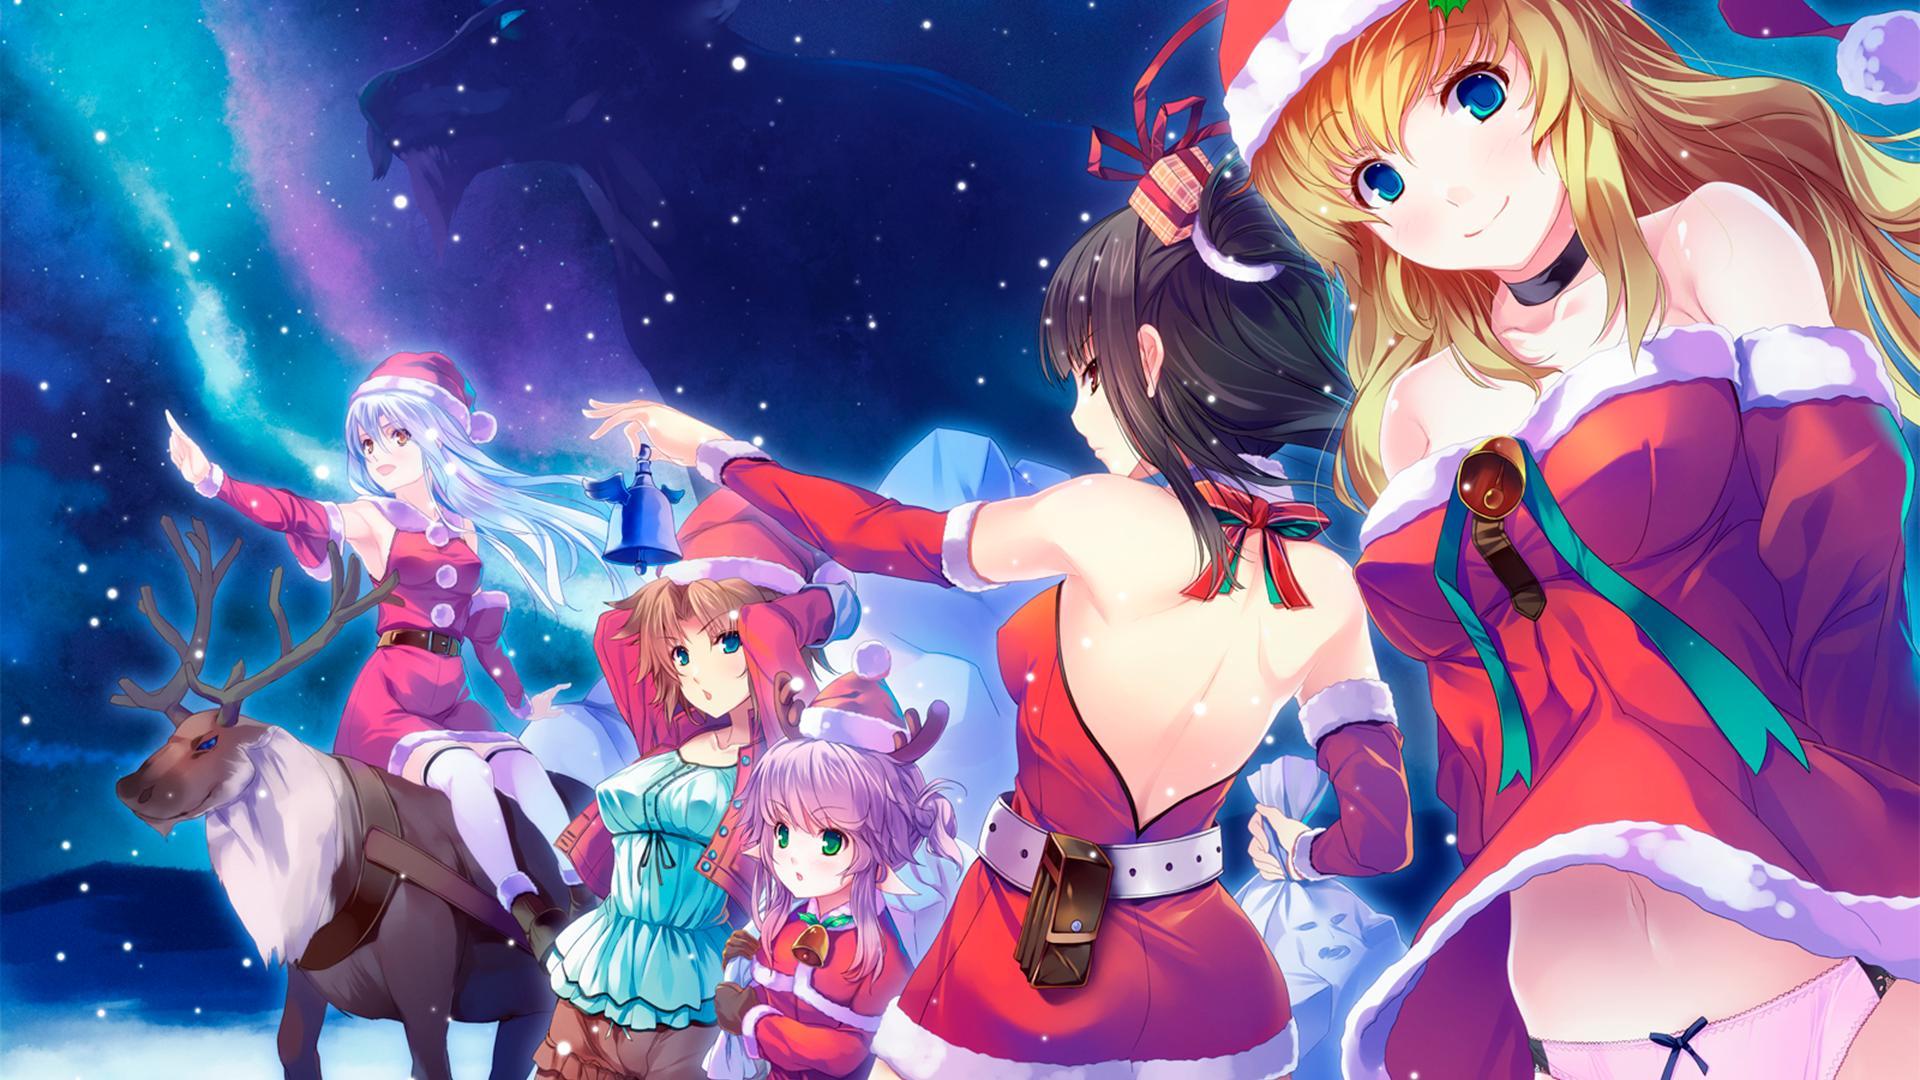 Anime Christmas Wallpaper, wallpaper collections at